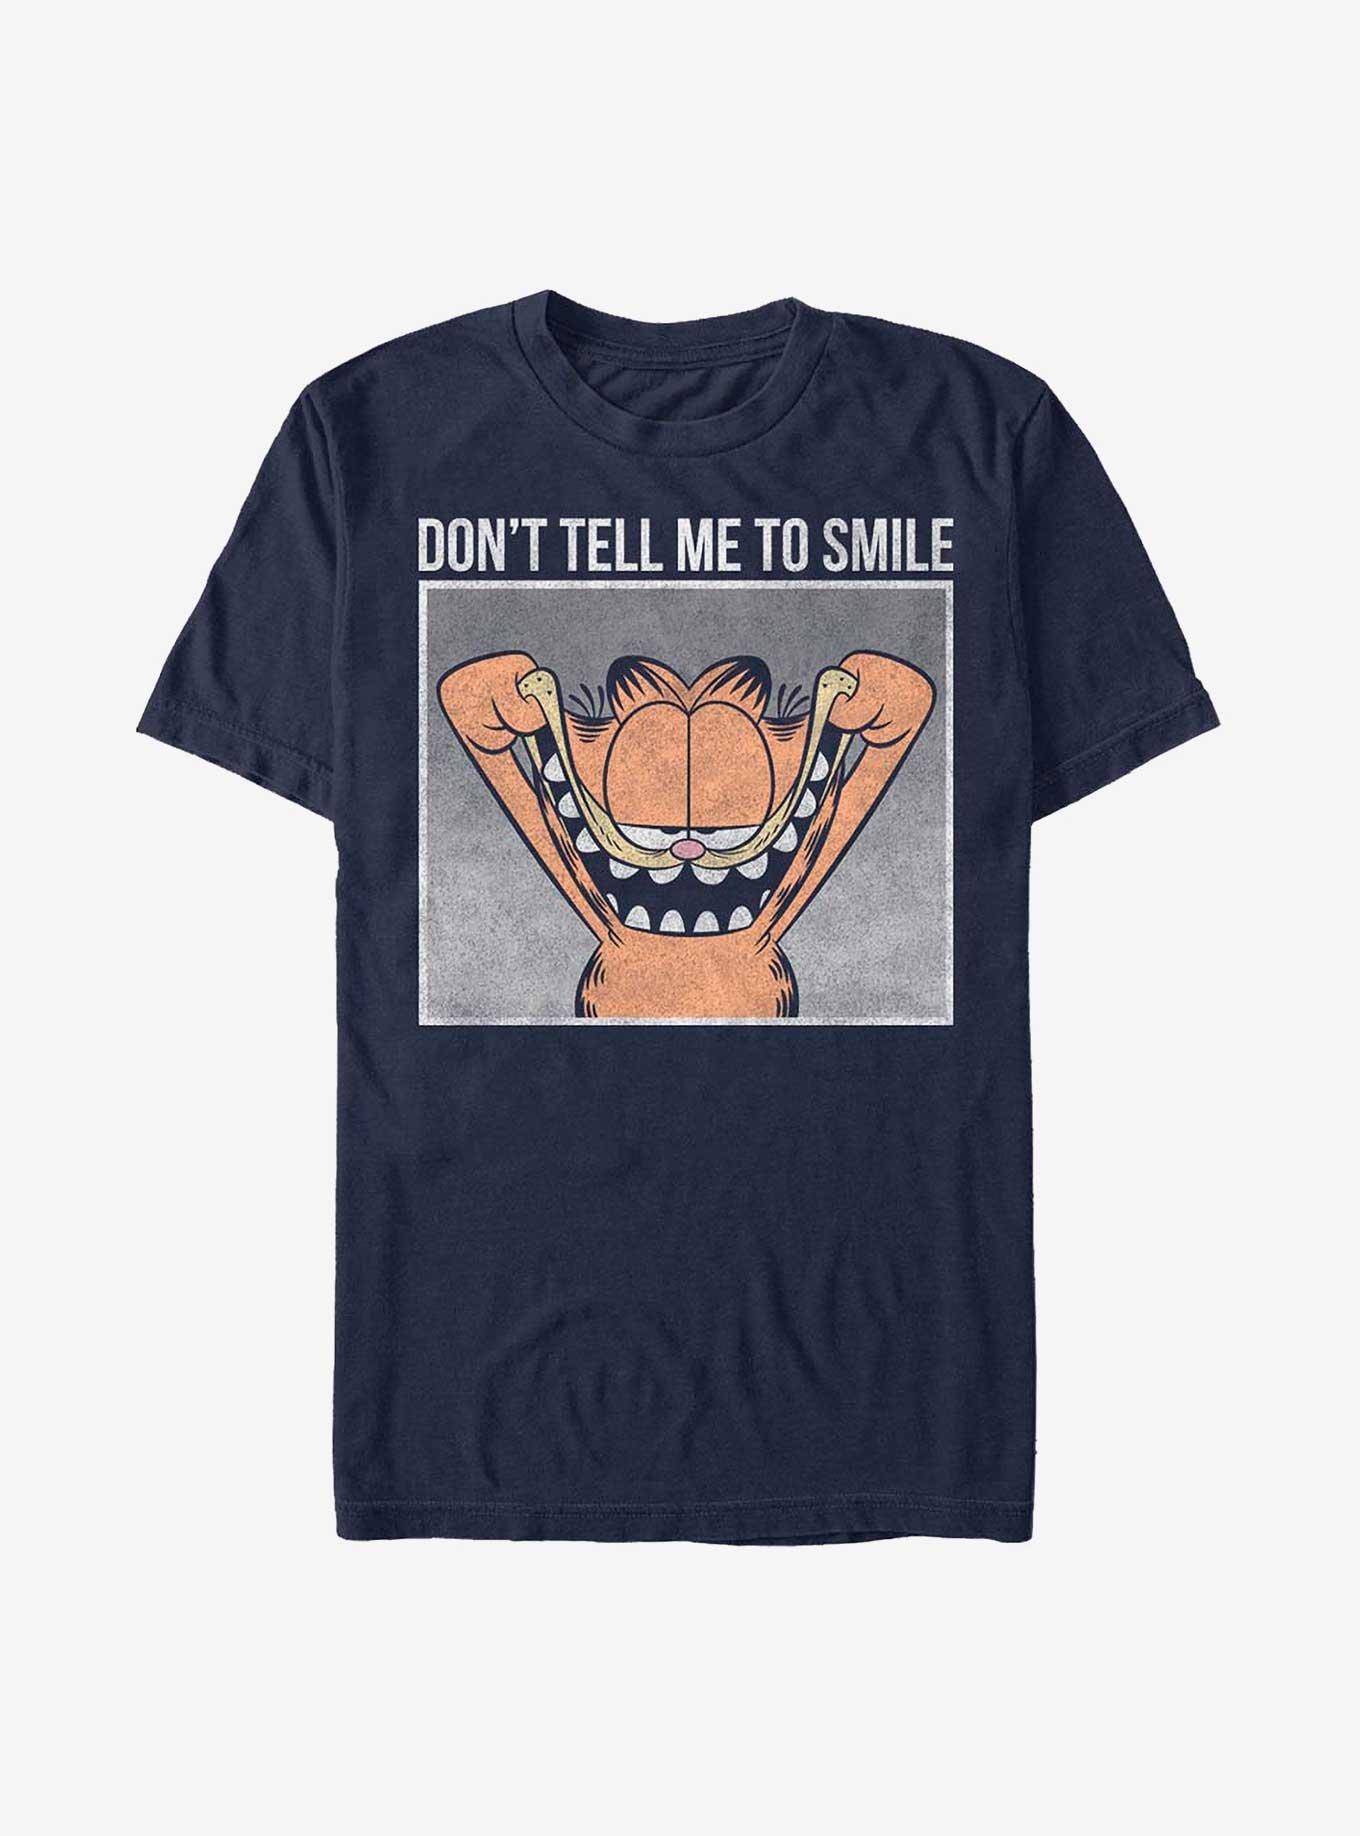 Garfield Don't Tell Me To Smile T-Shirt, NAVY, hi-res